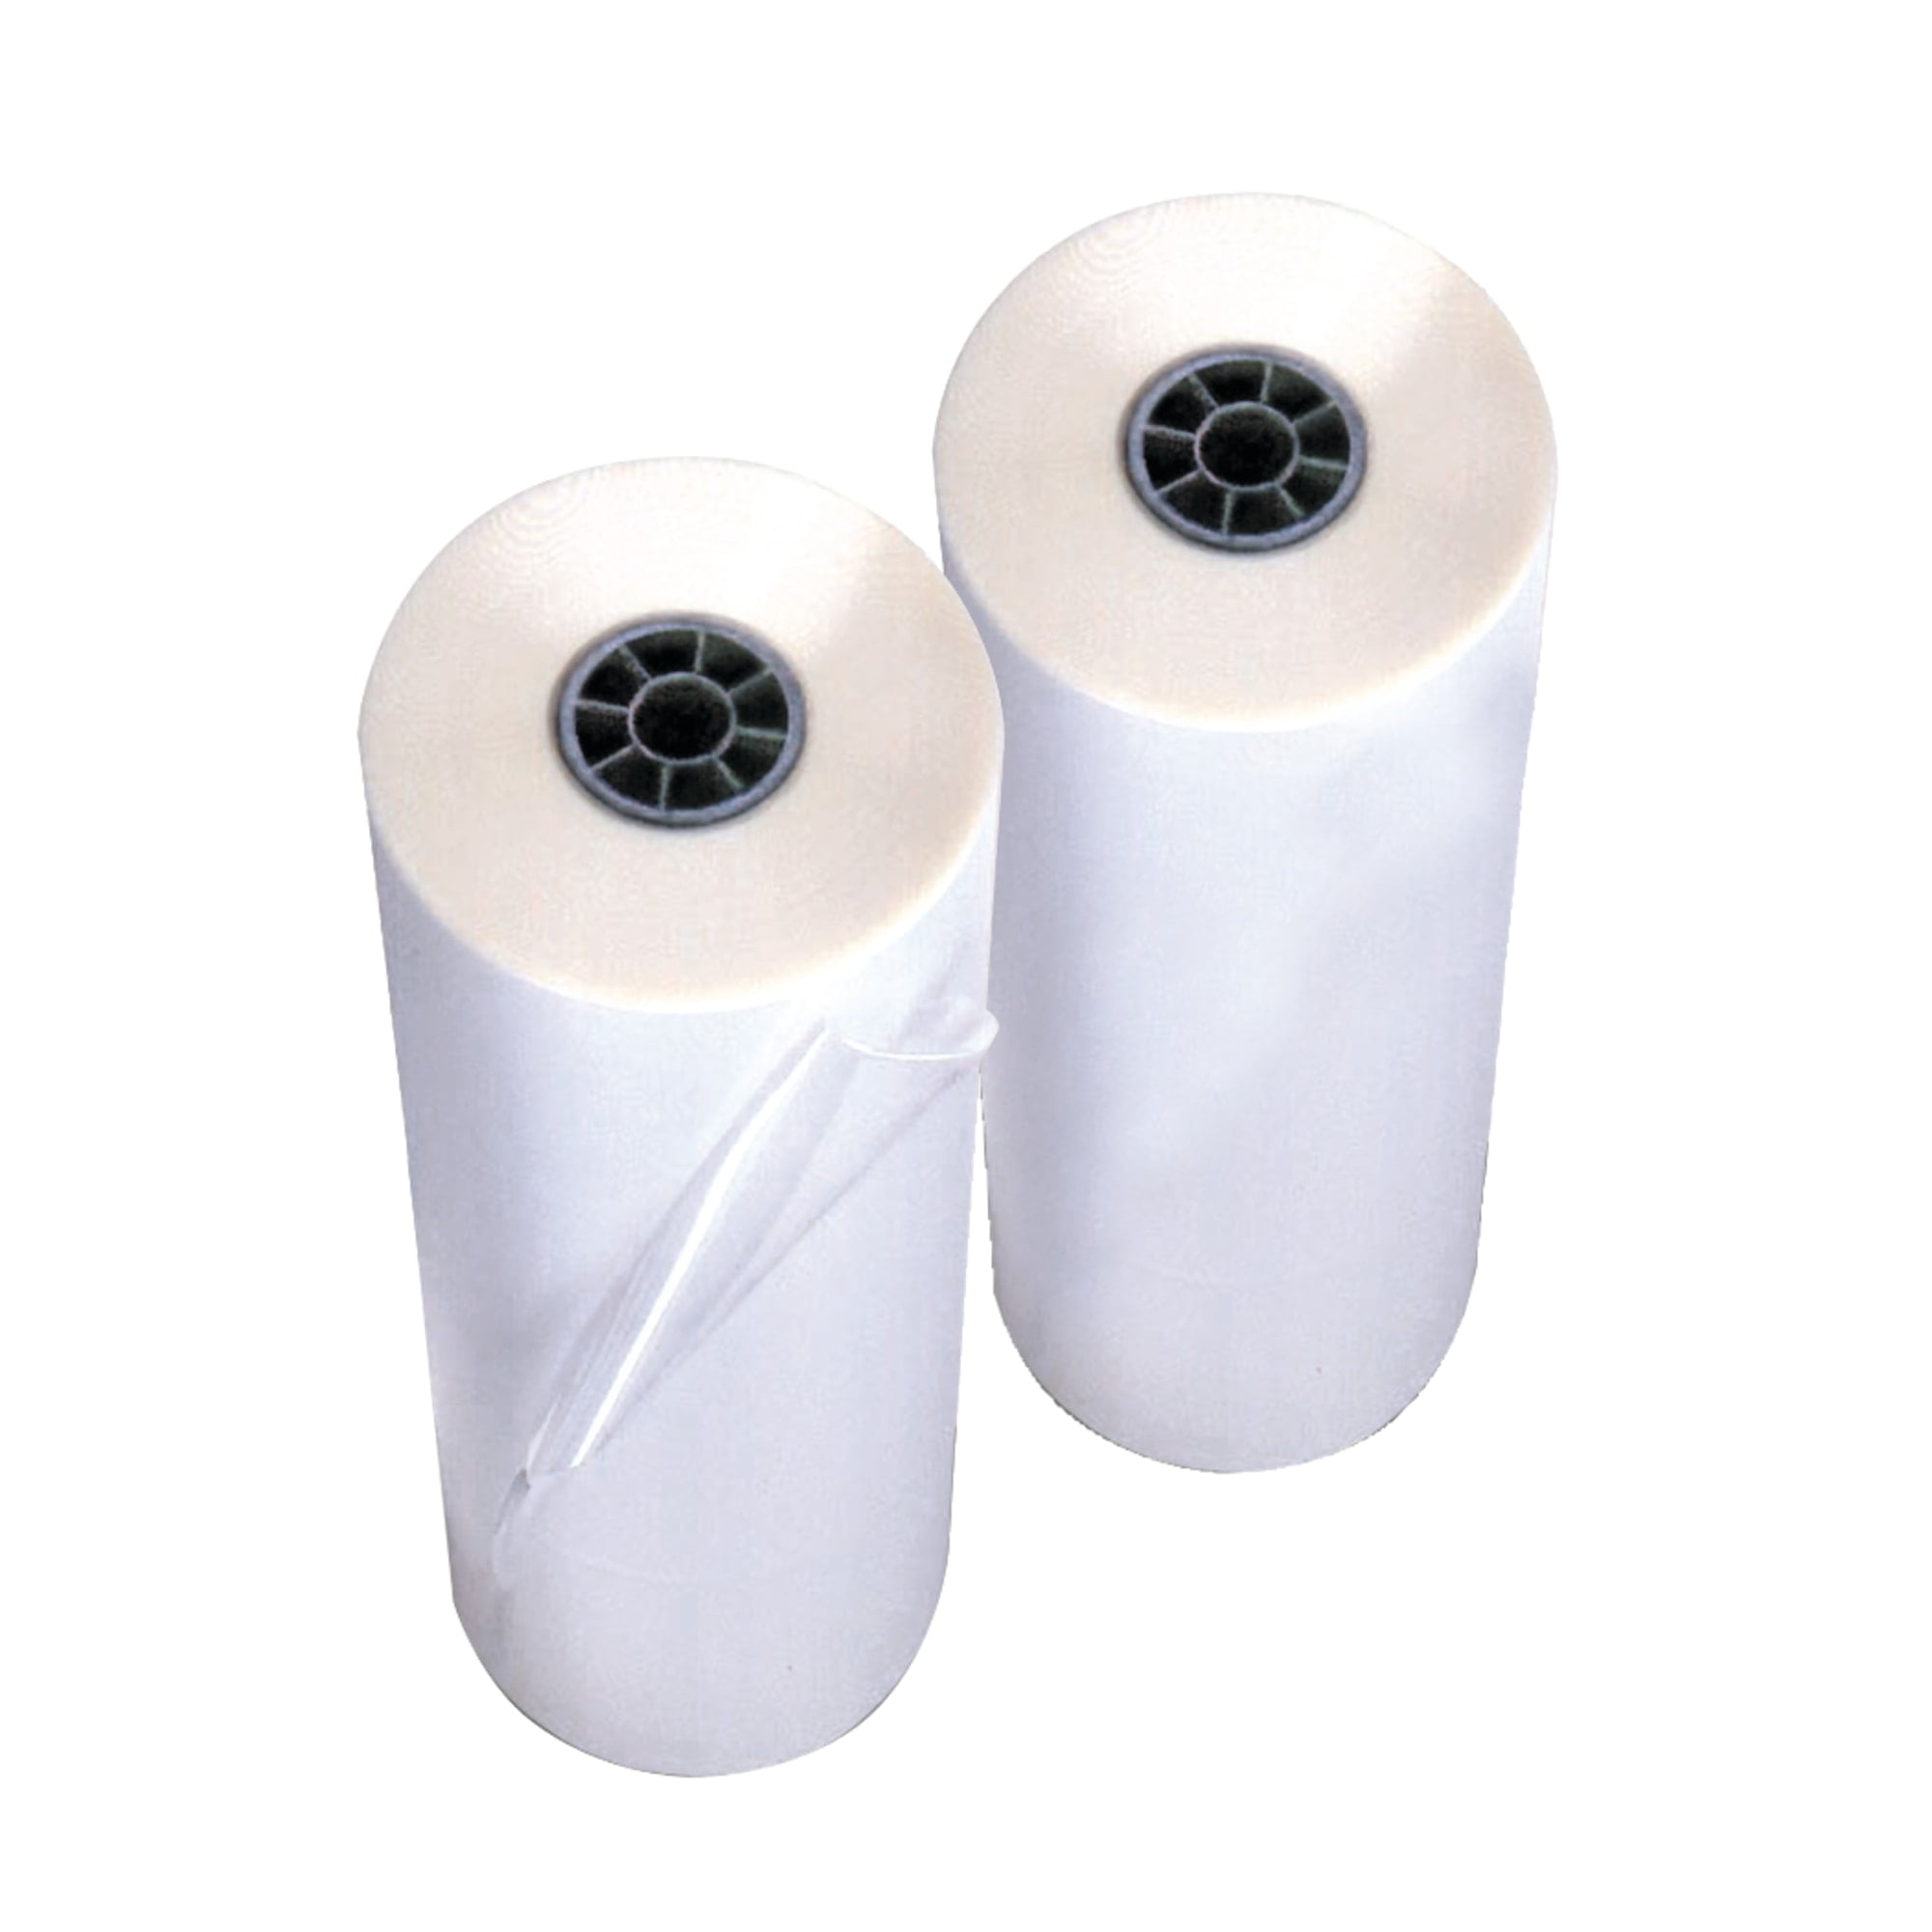 Duck Brand Brand Peel & Stick Laminate Roll Laminating Pouch/Sheet Size:  18 Width x 24 ft Length - Acid-free - Clear - 1 Roll 